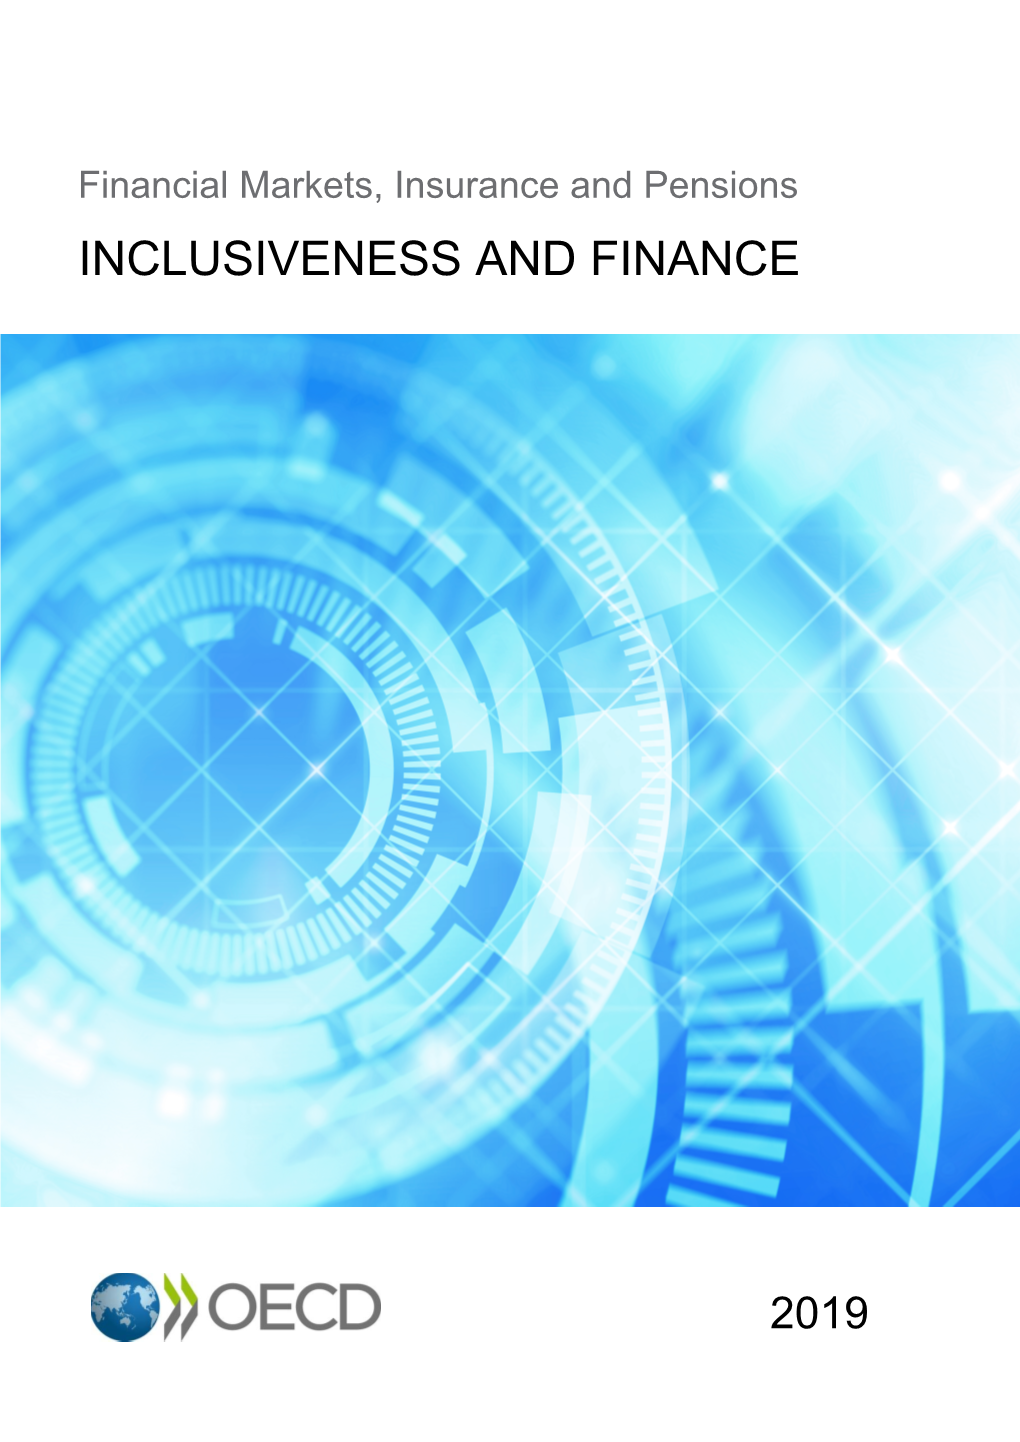 Financial Markets Insurance and Pensions: Inclusiveness and Finance